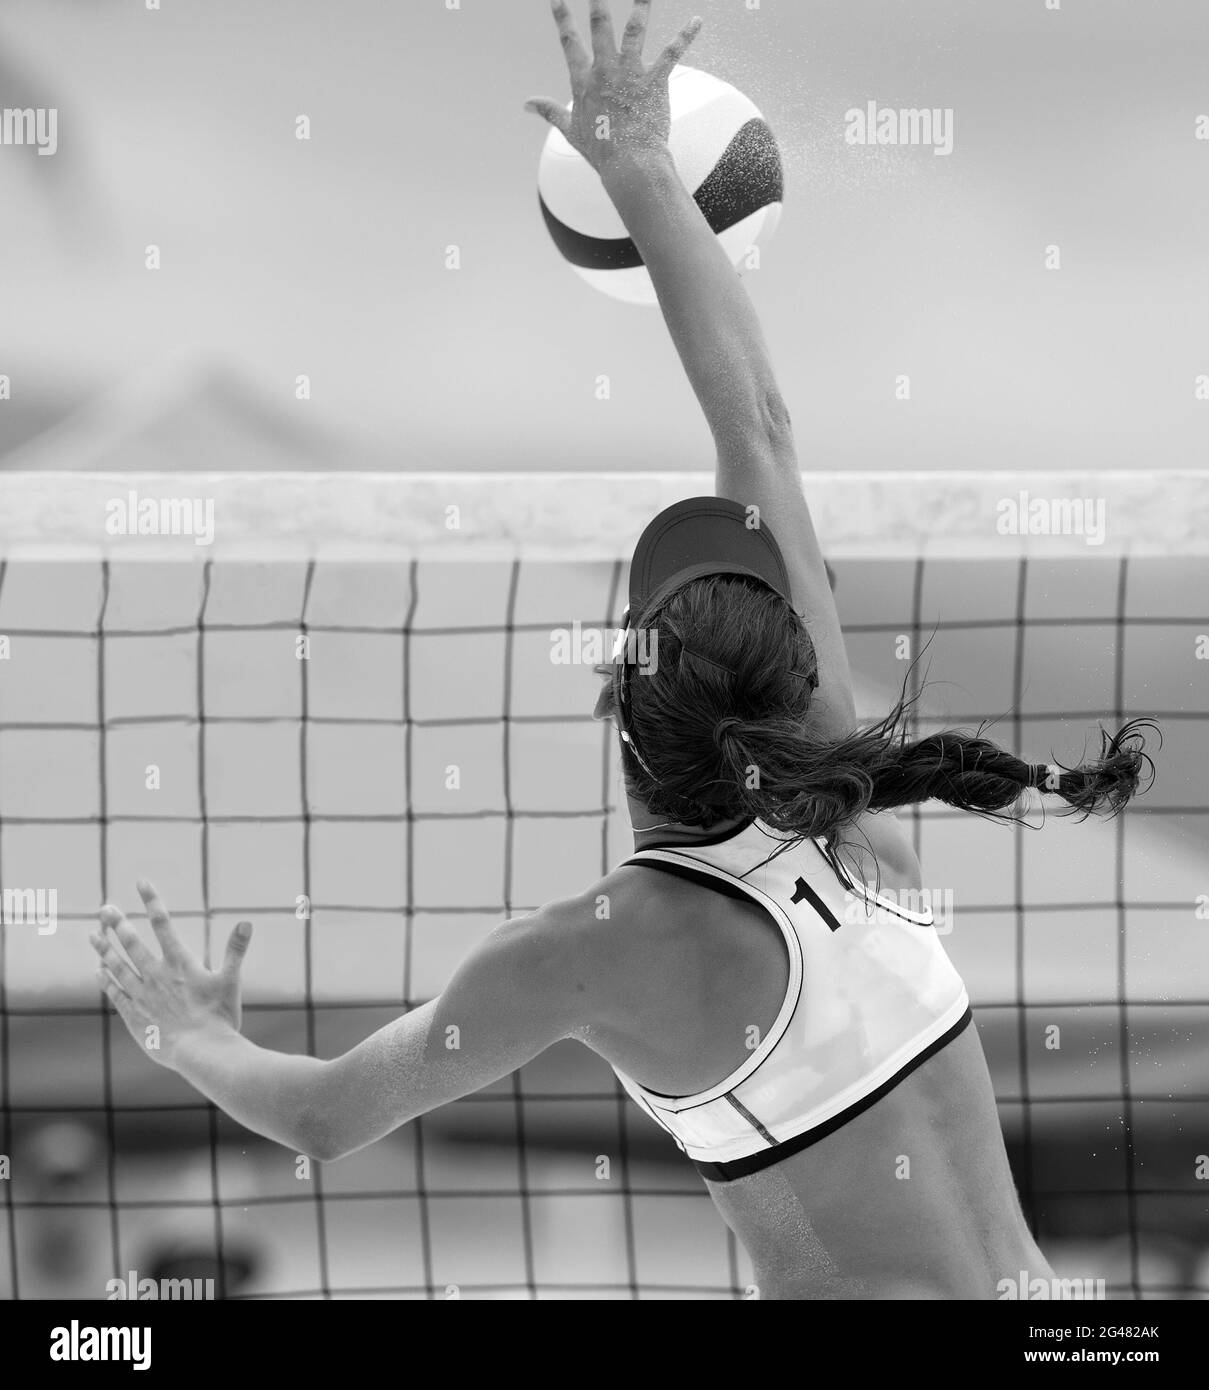 A Beach Volleyball Player Is Jumping At The Net And Spiking The Ball Down In Vertical Black And White Image Format Stock Photo